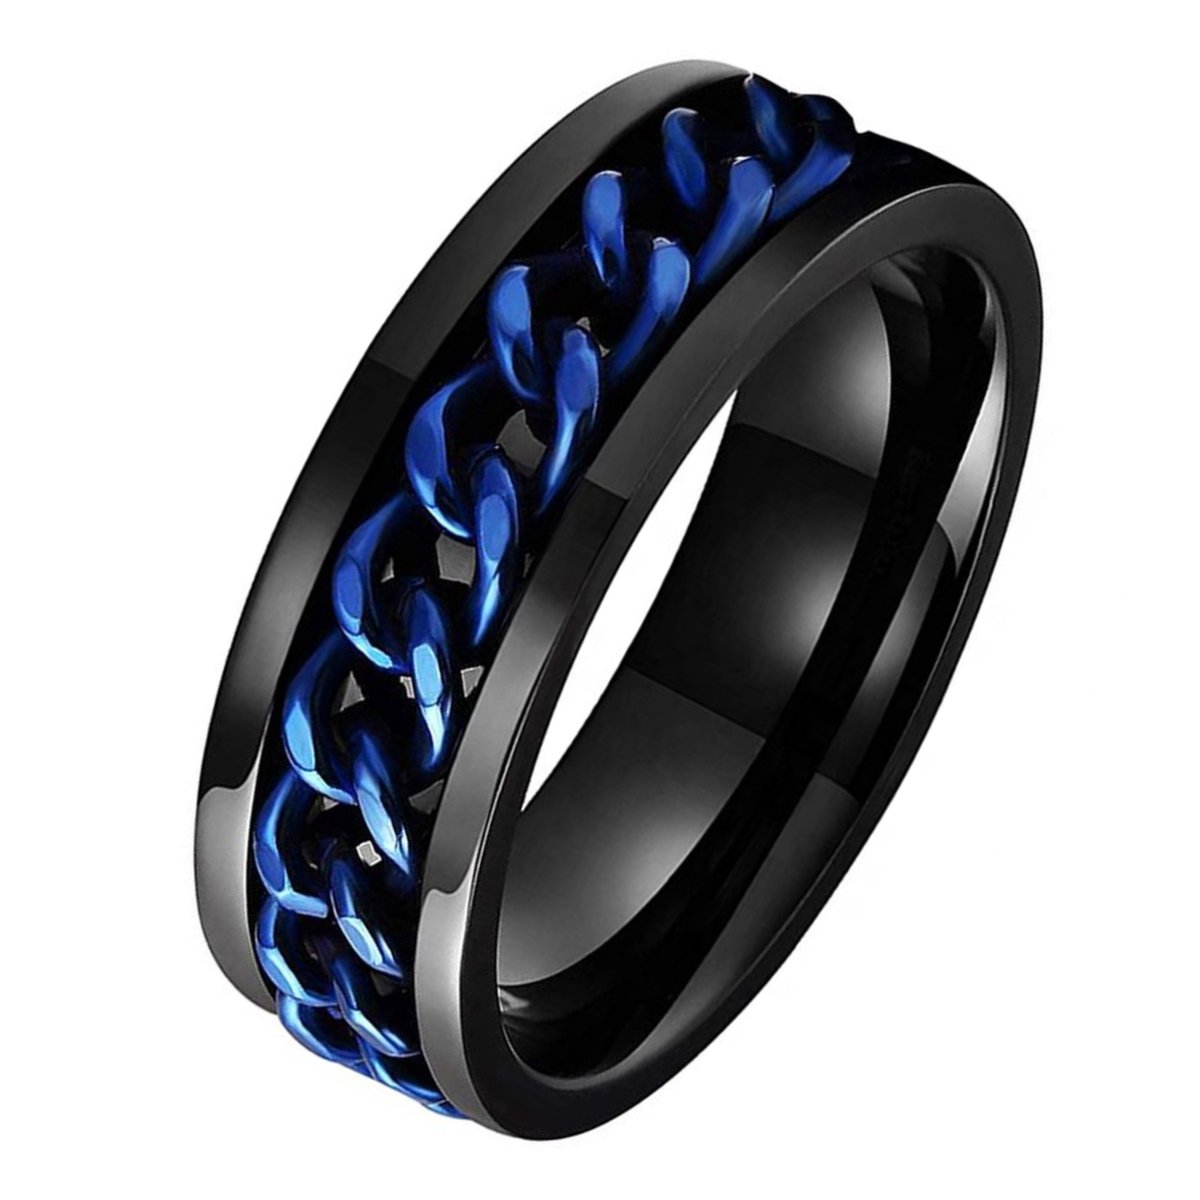 Anxiety Ring - (Kettinkje) - Stress Ring - Fidget Ring - Anxiety Ring For Finger - Draaibare Ring - Spinning Ring - Zwart-Blauw - (19.25mm / maat 60)